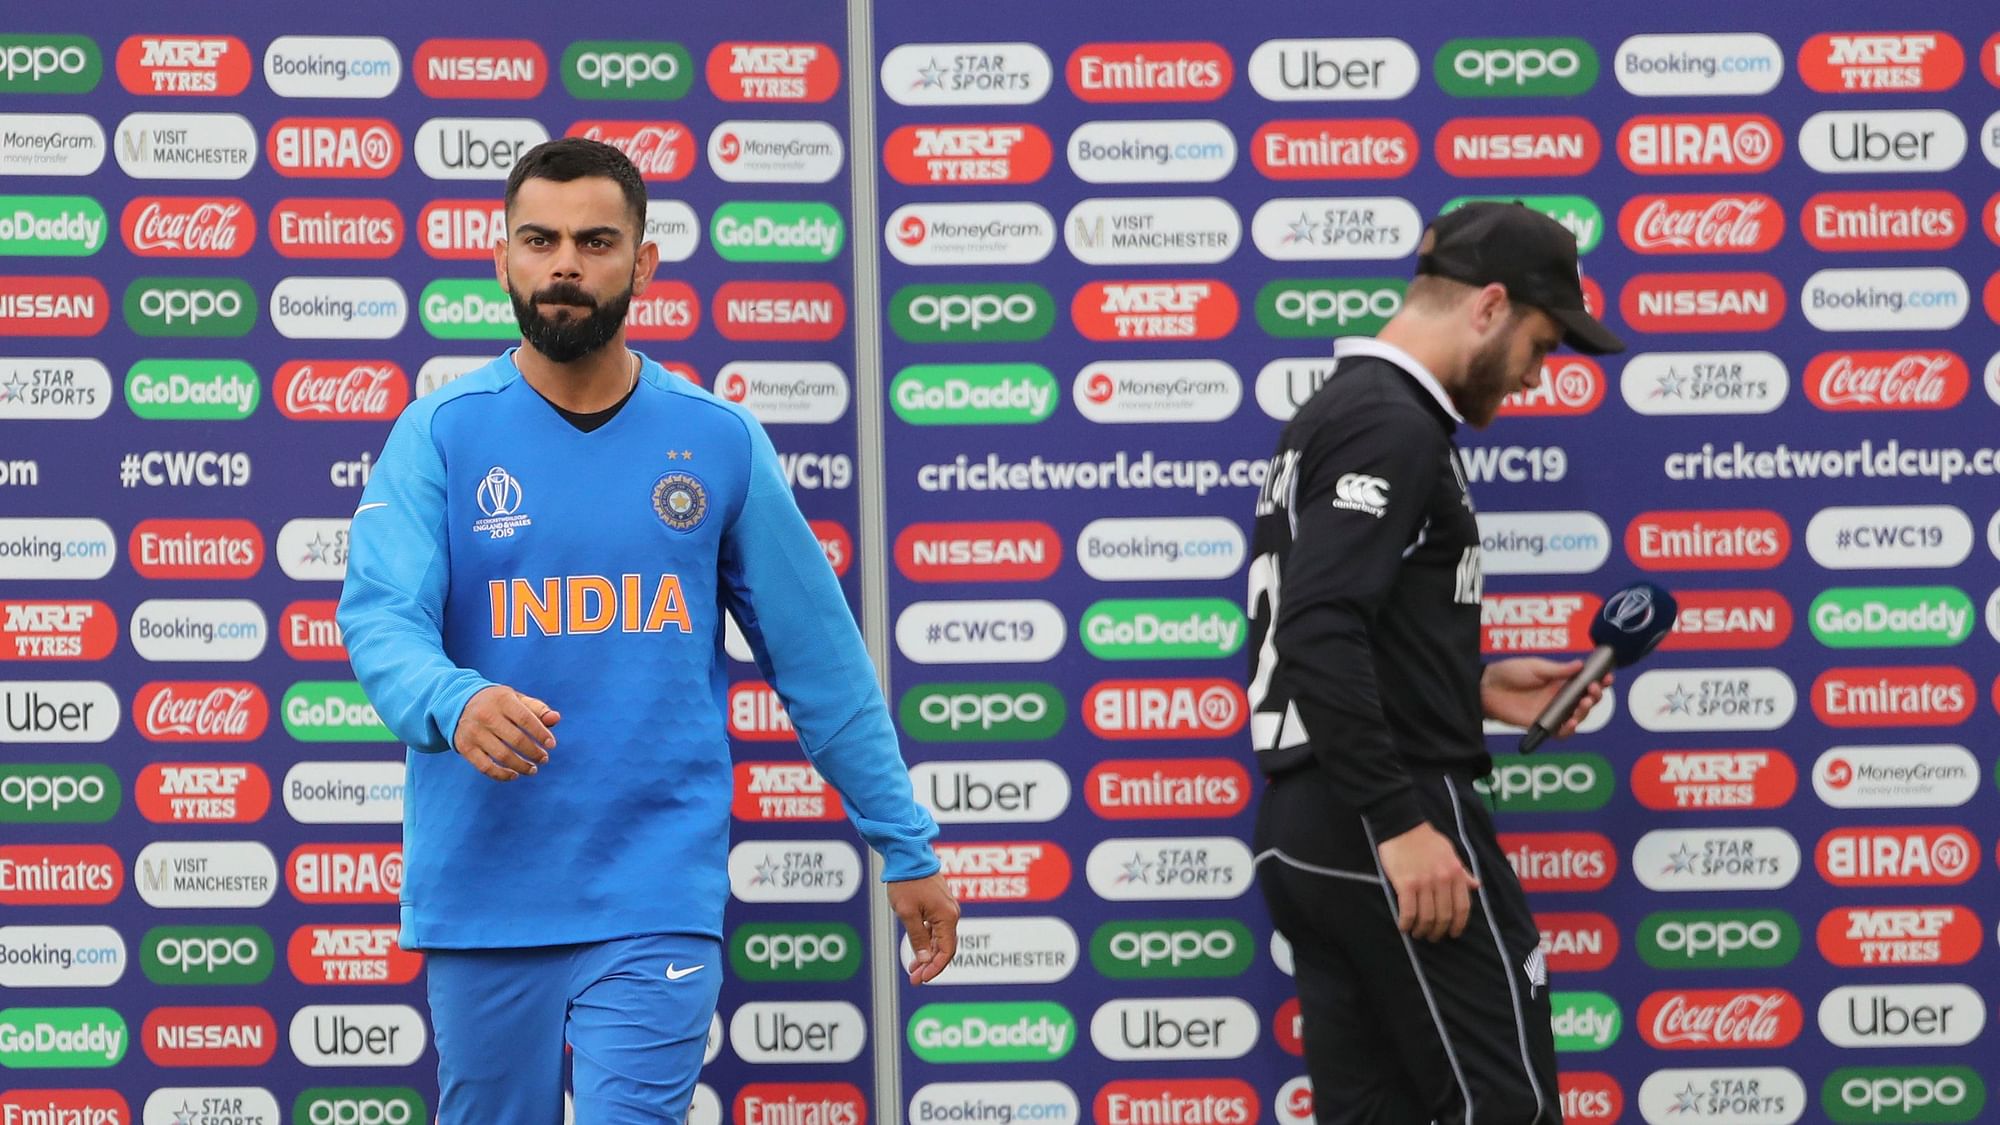 India lost to New Zealand by 18 runs in a two-day semi-final of the 2019 ICC World Cup in Manchester.